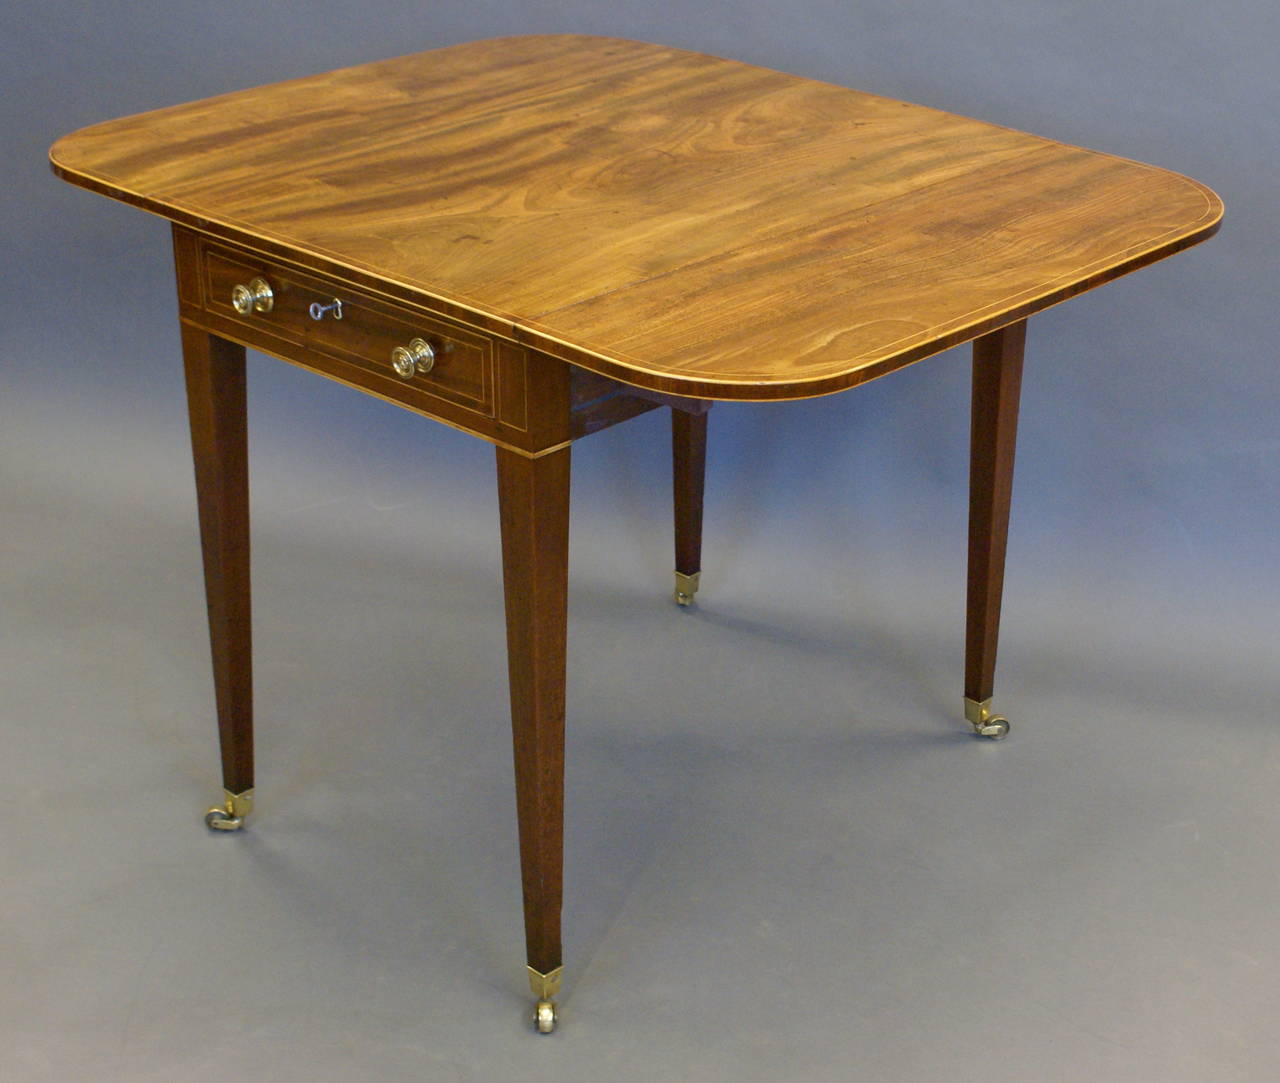 In finely grained Cuban mahogany and detailed with box-wood stringing. The table retains all its original brass work and is of very good faded colour and condition and has been recently lightly and sympathetically restored.